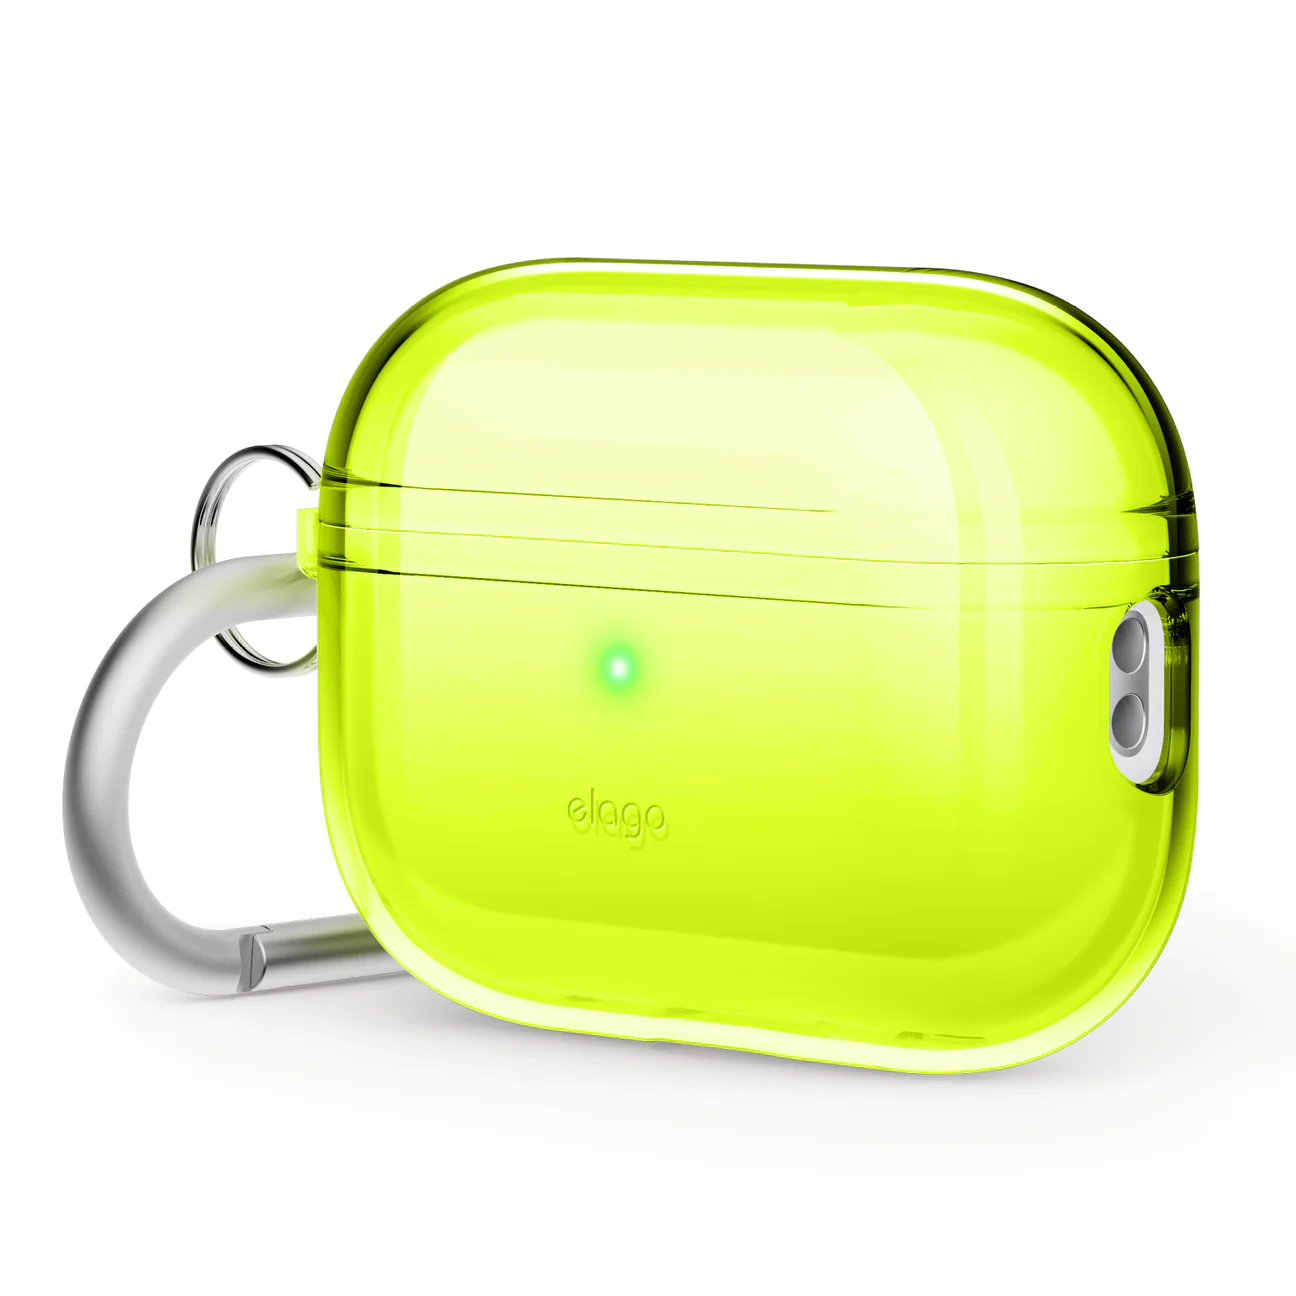 Elago Clear Hang case for AirPods Pro 2 - Neon Yellow (EAPP2CL-HANG-NYE)